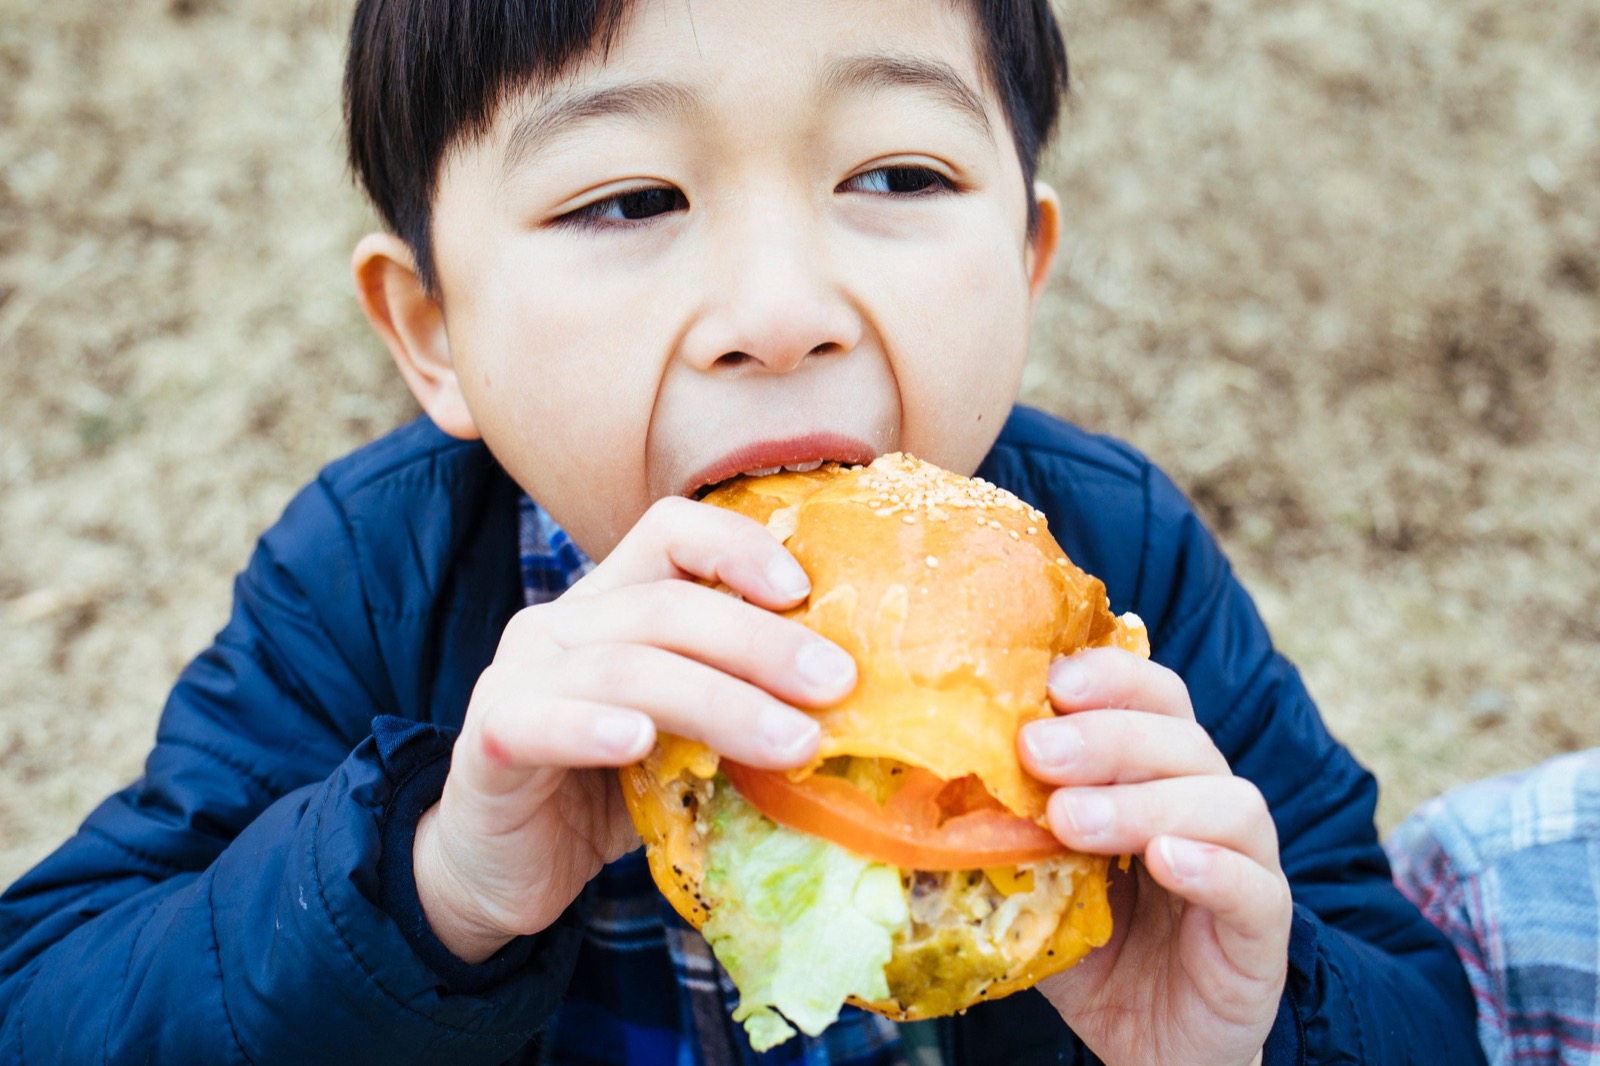 It’s Easy to Tell If You’re More American, British or Australian Just by Your Eating Habits Child Eating Hamburger